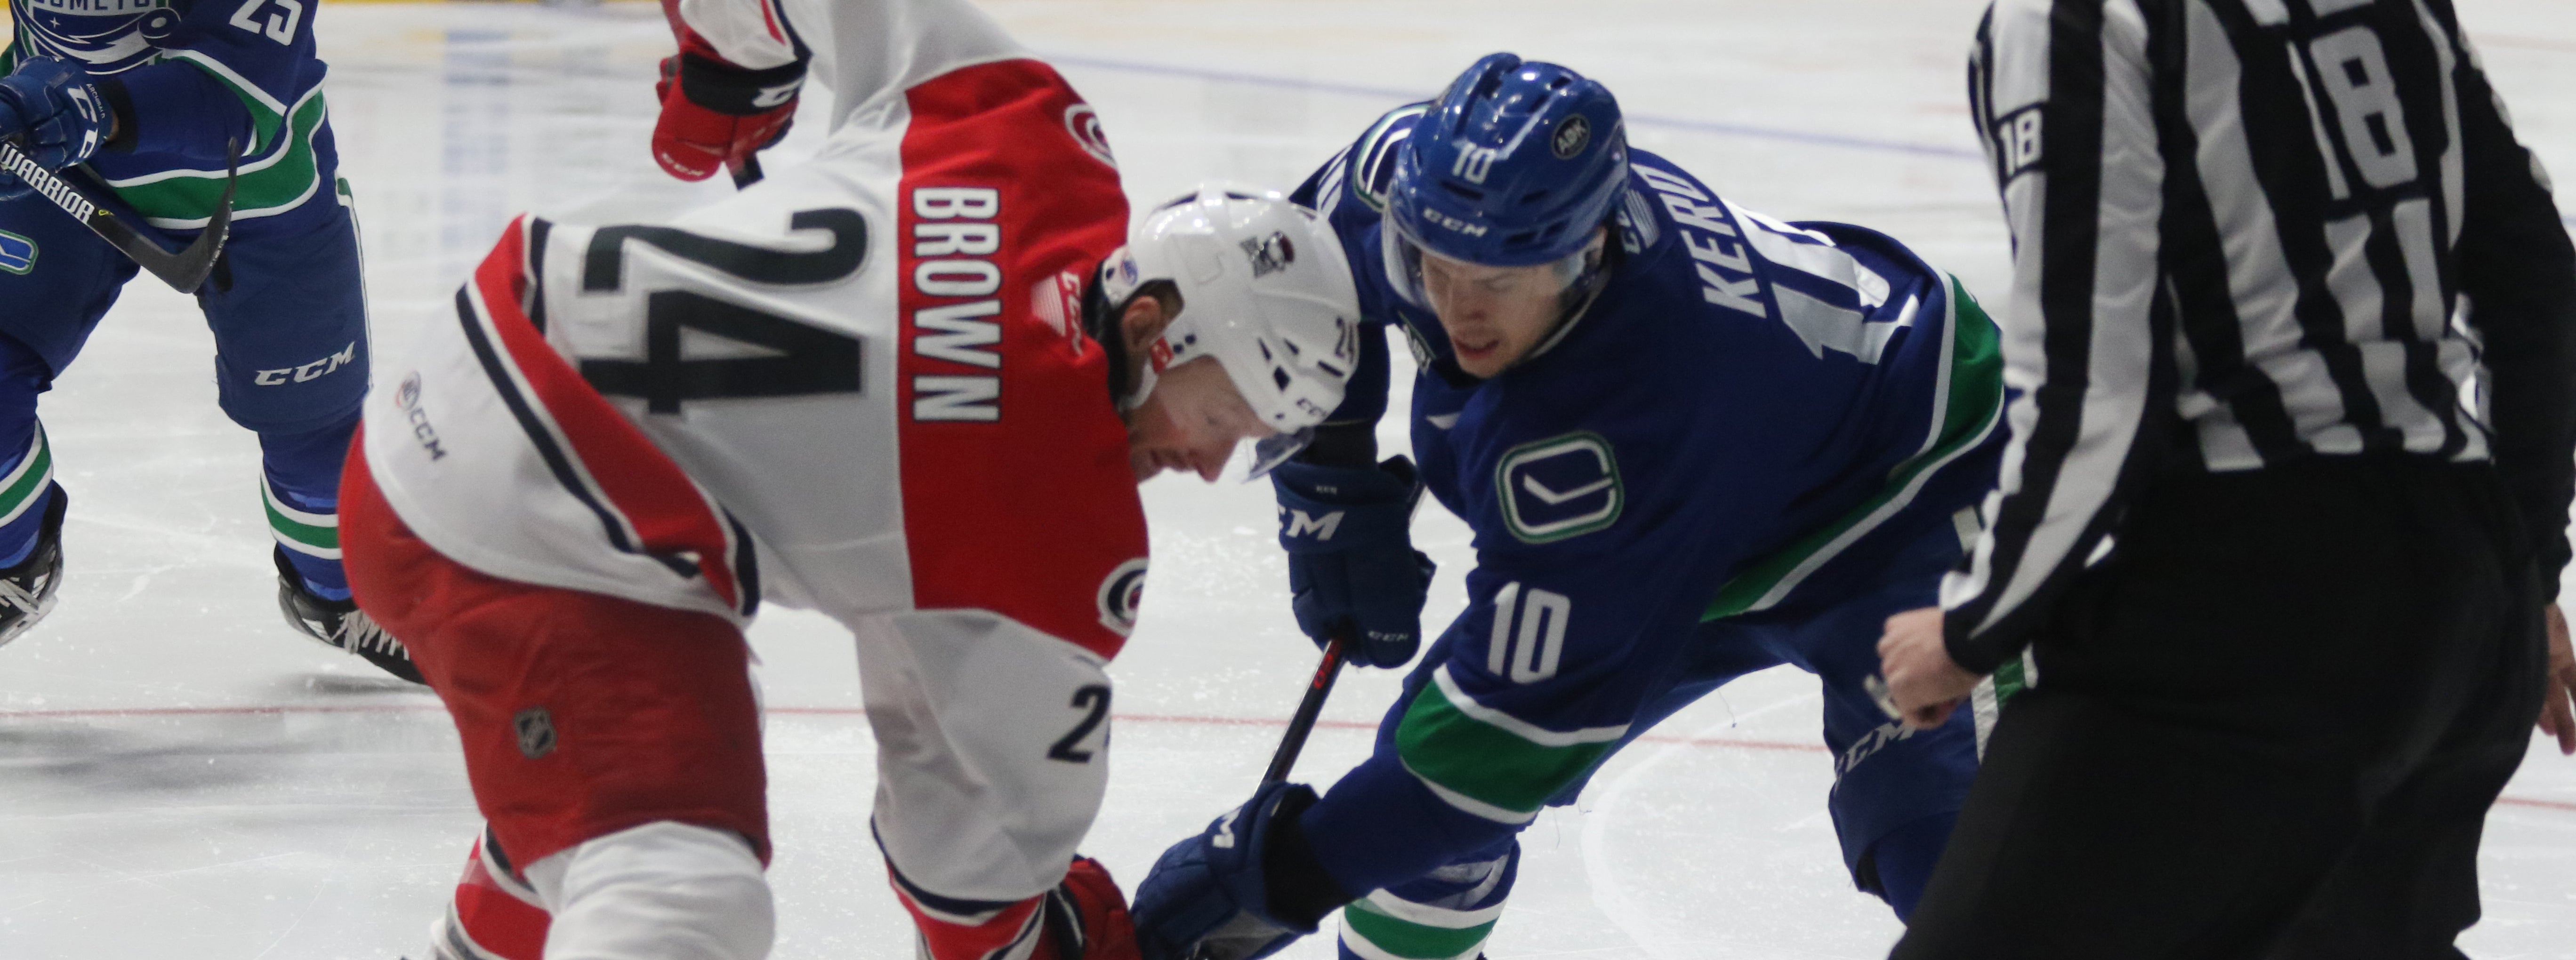 COMETS STREAK SNAPPED BY CHECKERS IN OVERTIME